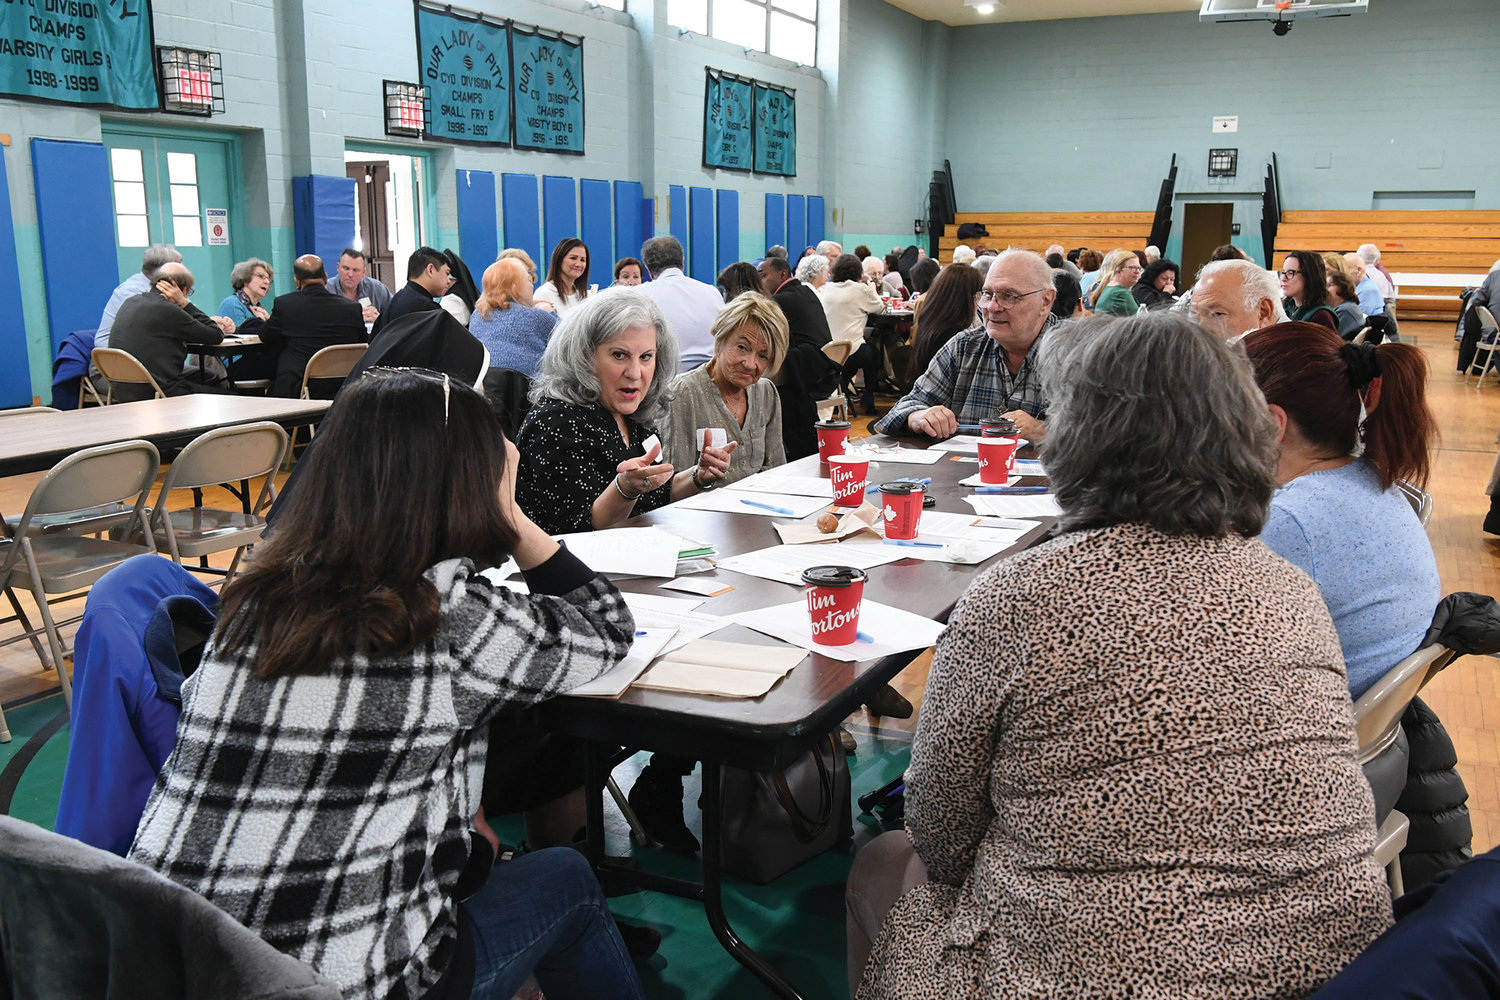 Attendees break into groups to discuss the Church’s “doing well” programs and activities, as well as “could do better” efforts.